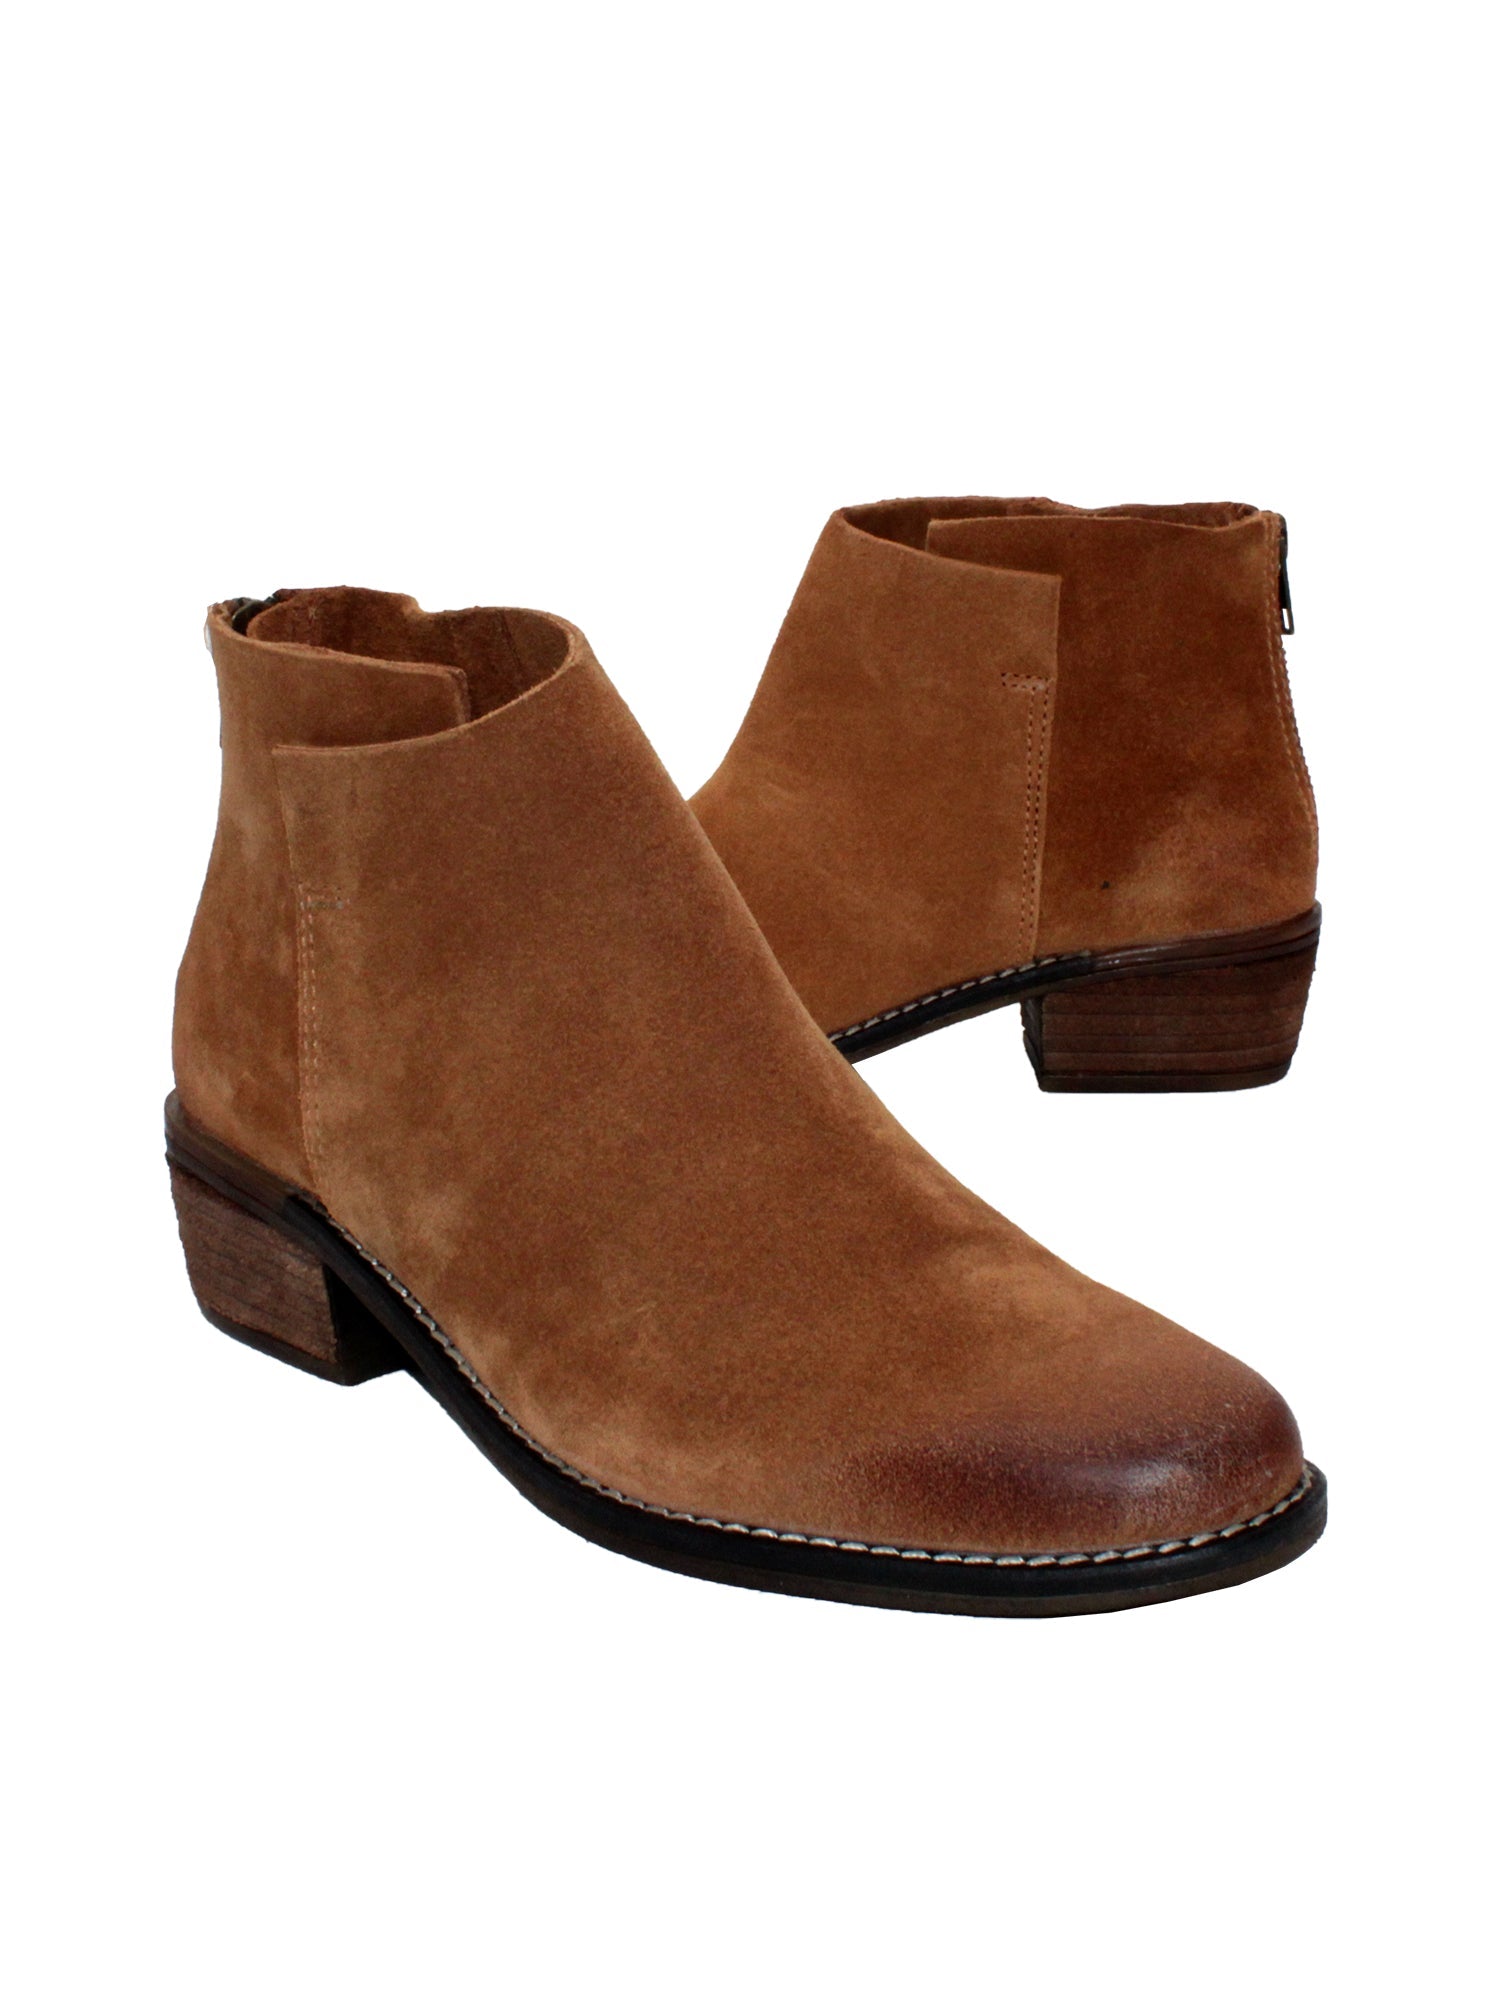 Very Volatile’s hand burnished suede ‘Aldworth’ bootie whiskey has an asymmetrical topline that adds effortless appeal to this wardrobe essential. Featuring padded insoles set atop sturdy rubber outsoles with stack leather heels and rustic stitched leather welting. 3/4 view angel